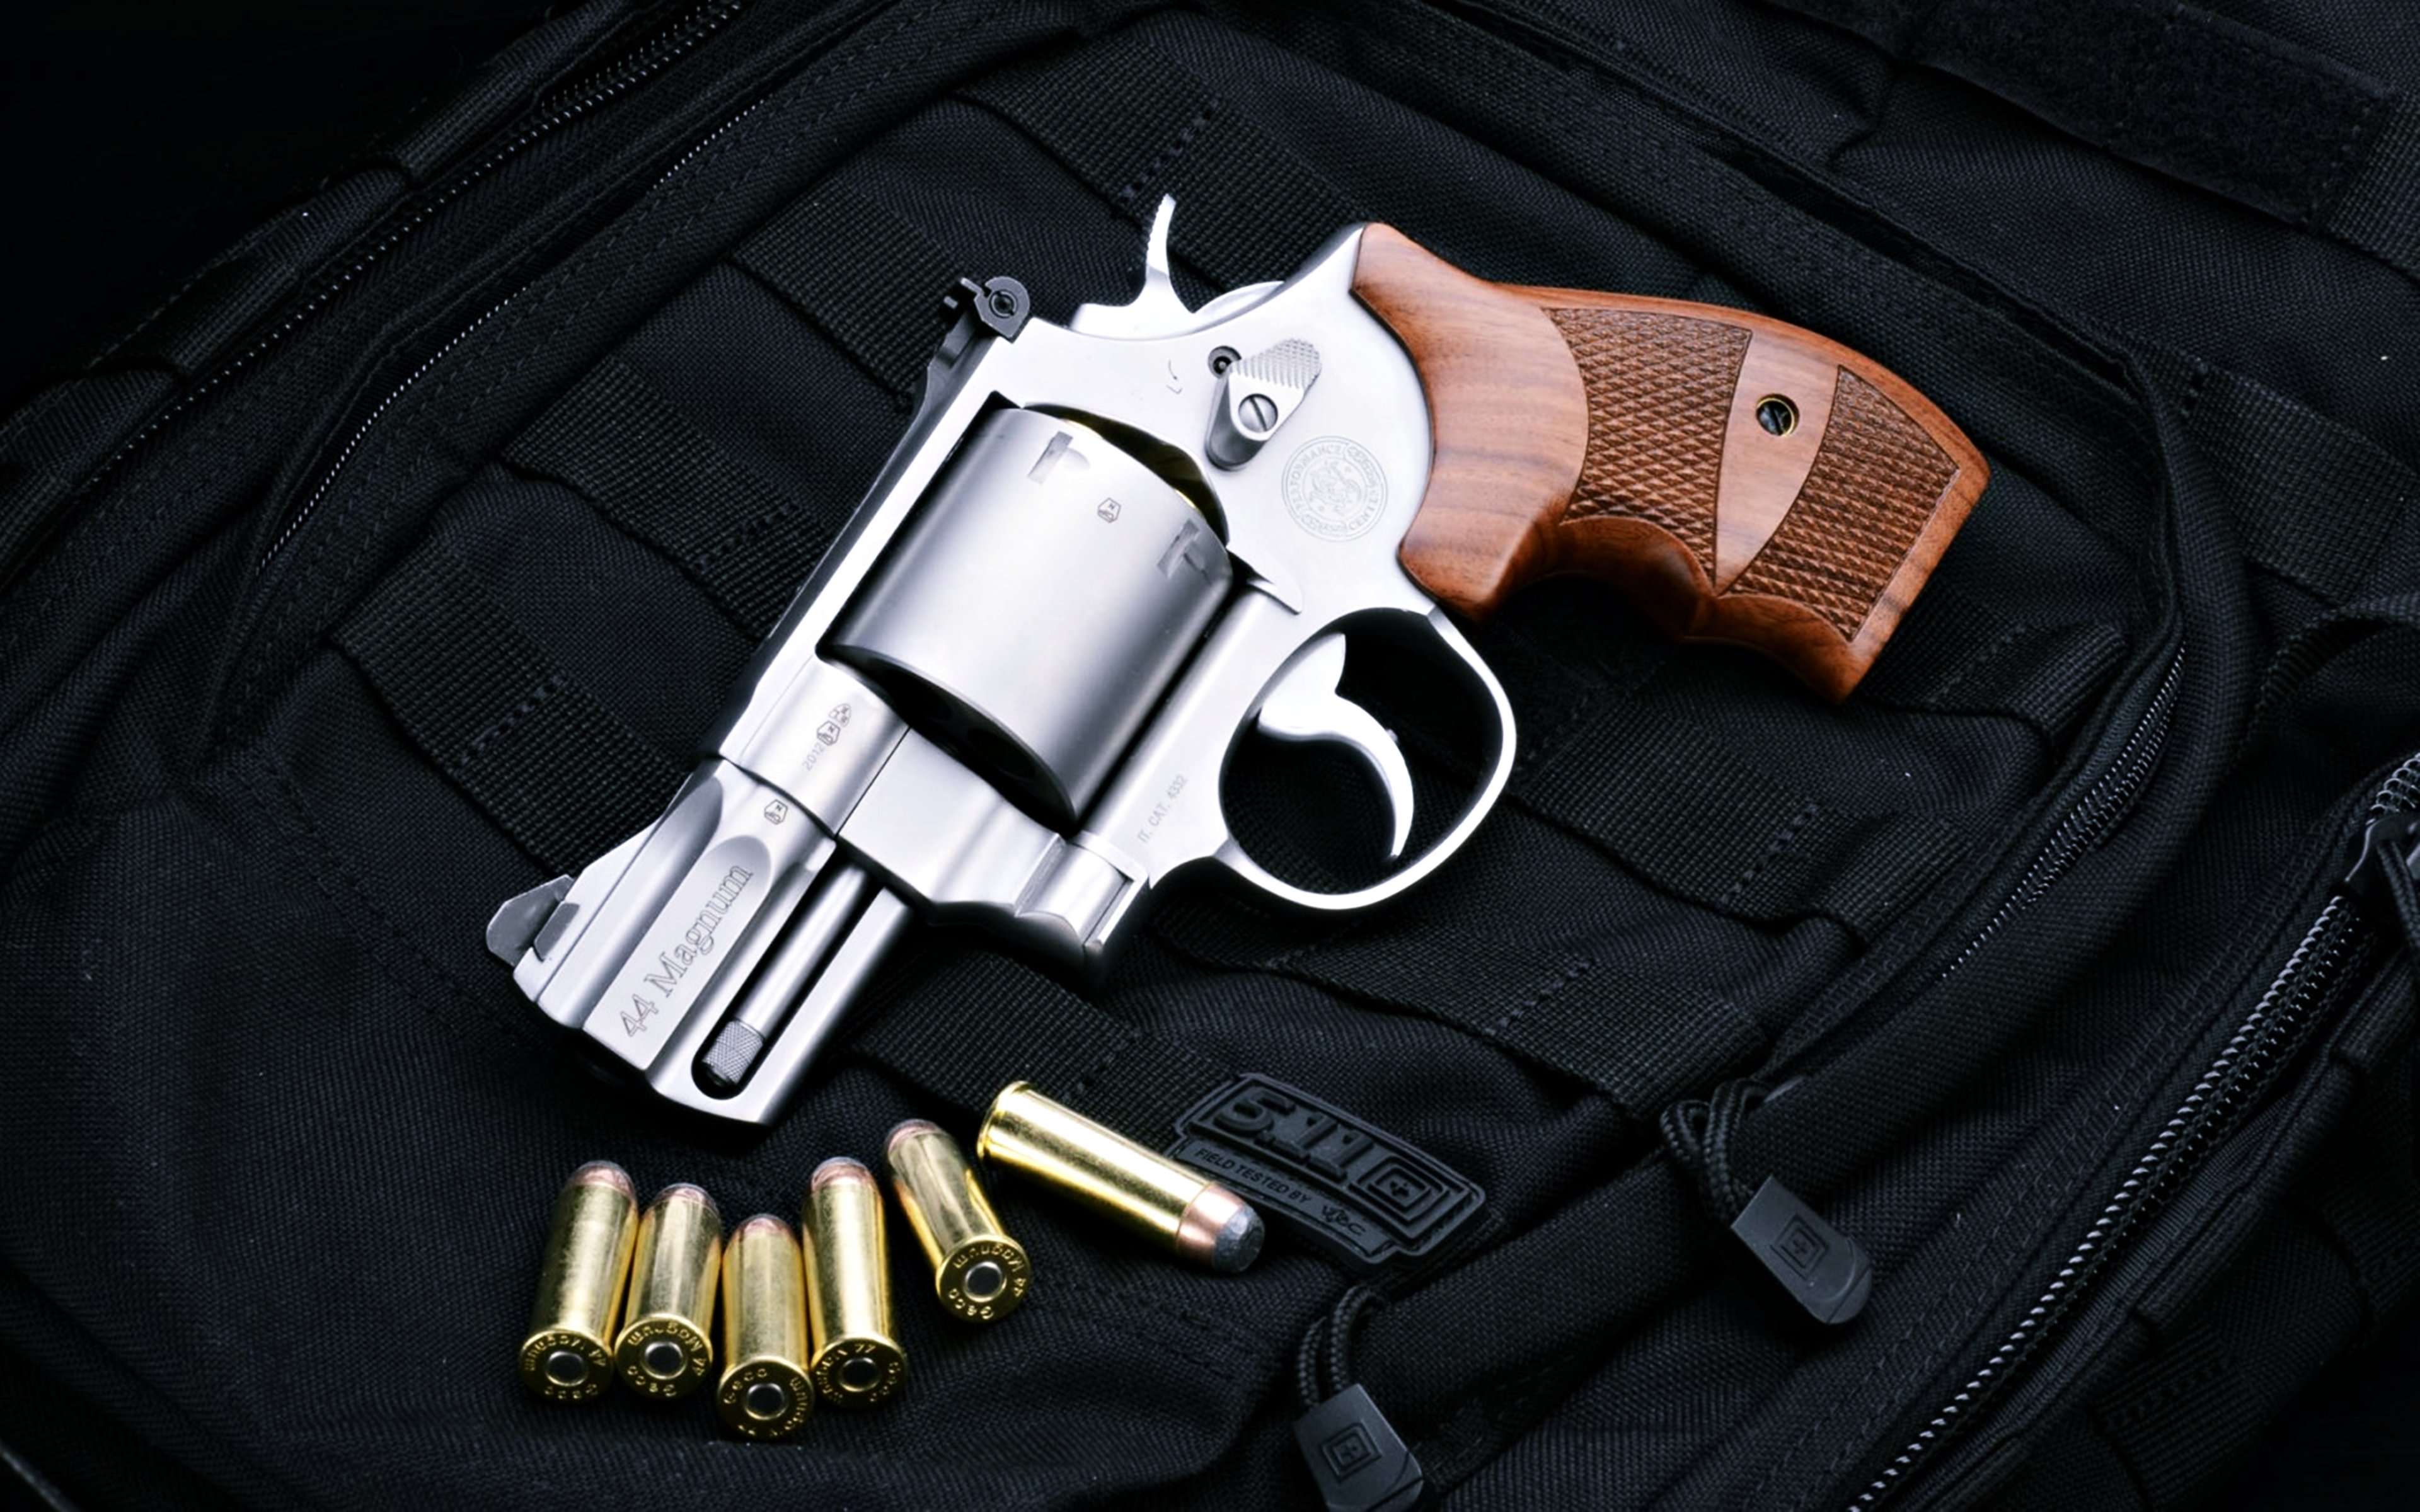 warrior, Pistol, Weapon, Ammunition, Bullets, Black, Police, Army, Military, Revolver, Smith, Wesson Wallpaper